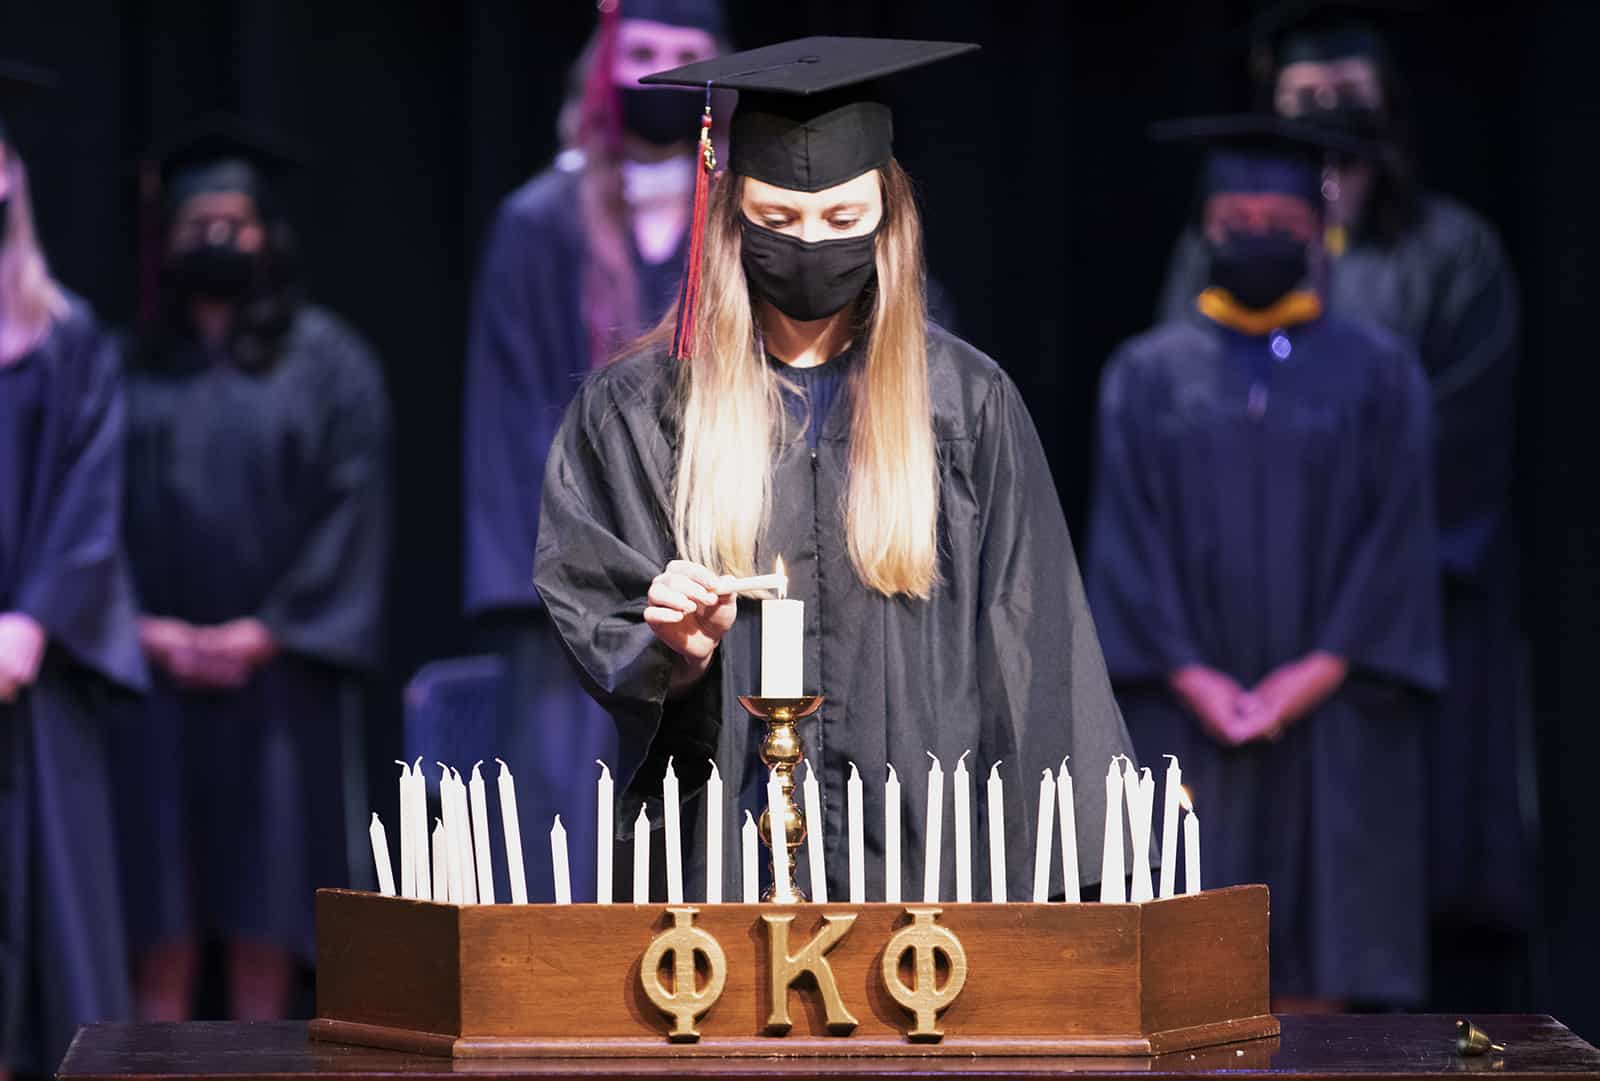 A new member of Phi Kappa Phi lights a candle.